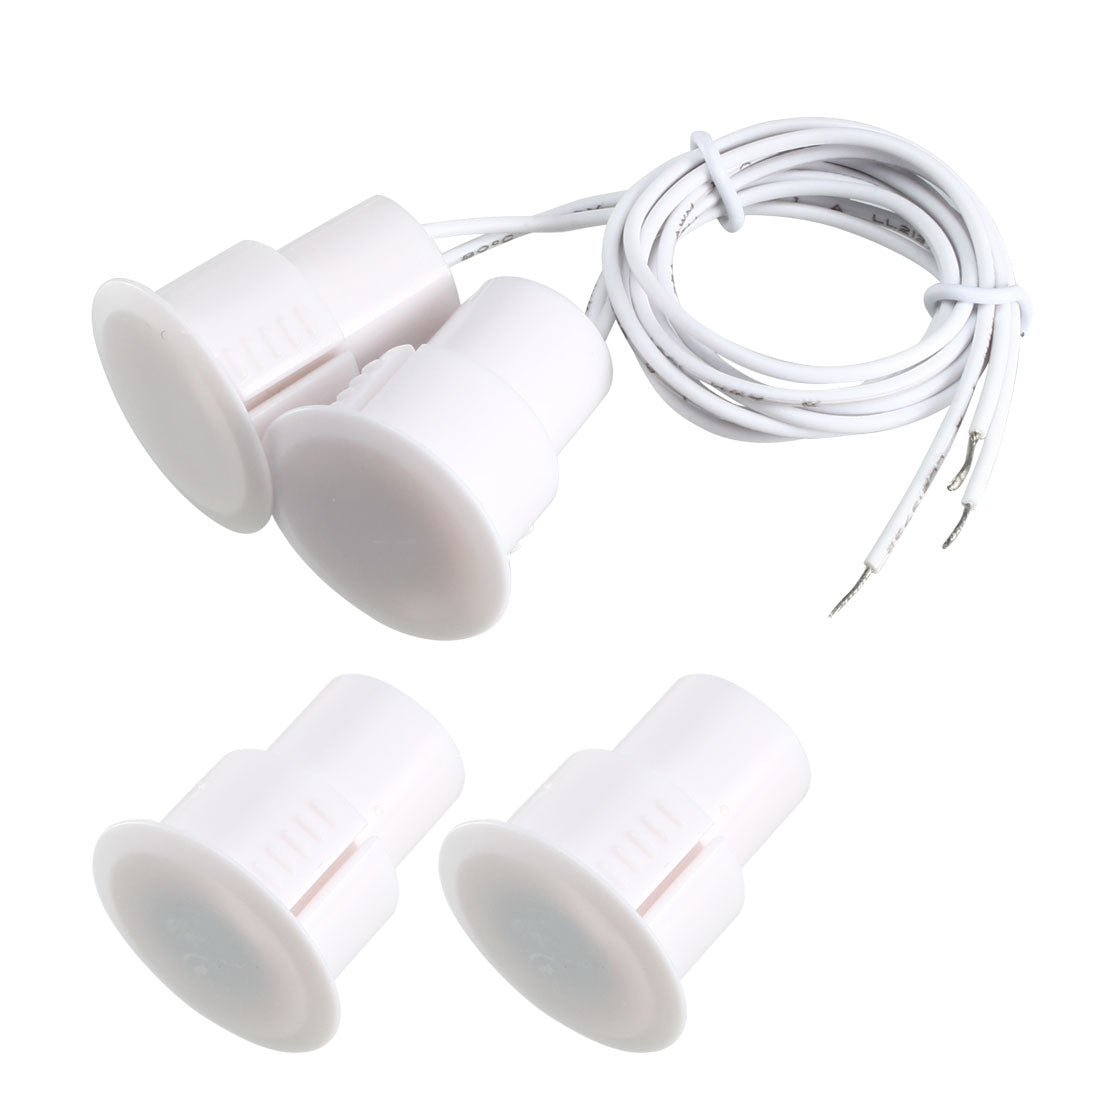 uxcell Uxcell 2pcs RC-36 NC Recessed Wired Security Window Door Contact Sensor Alarm Magnetic Reed Switch White